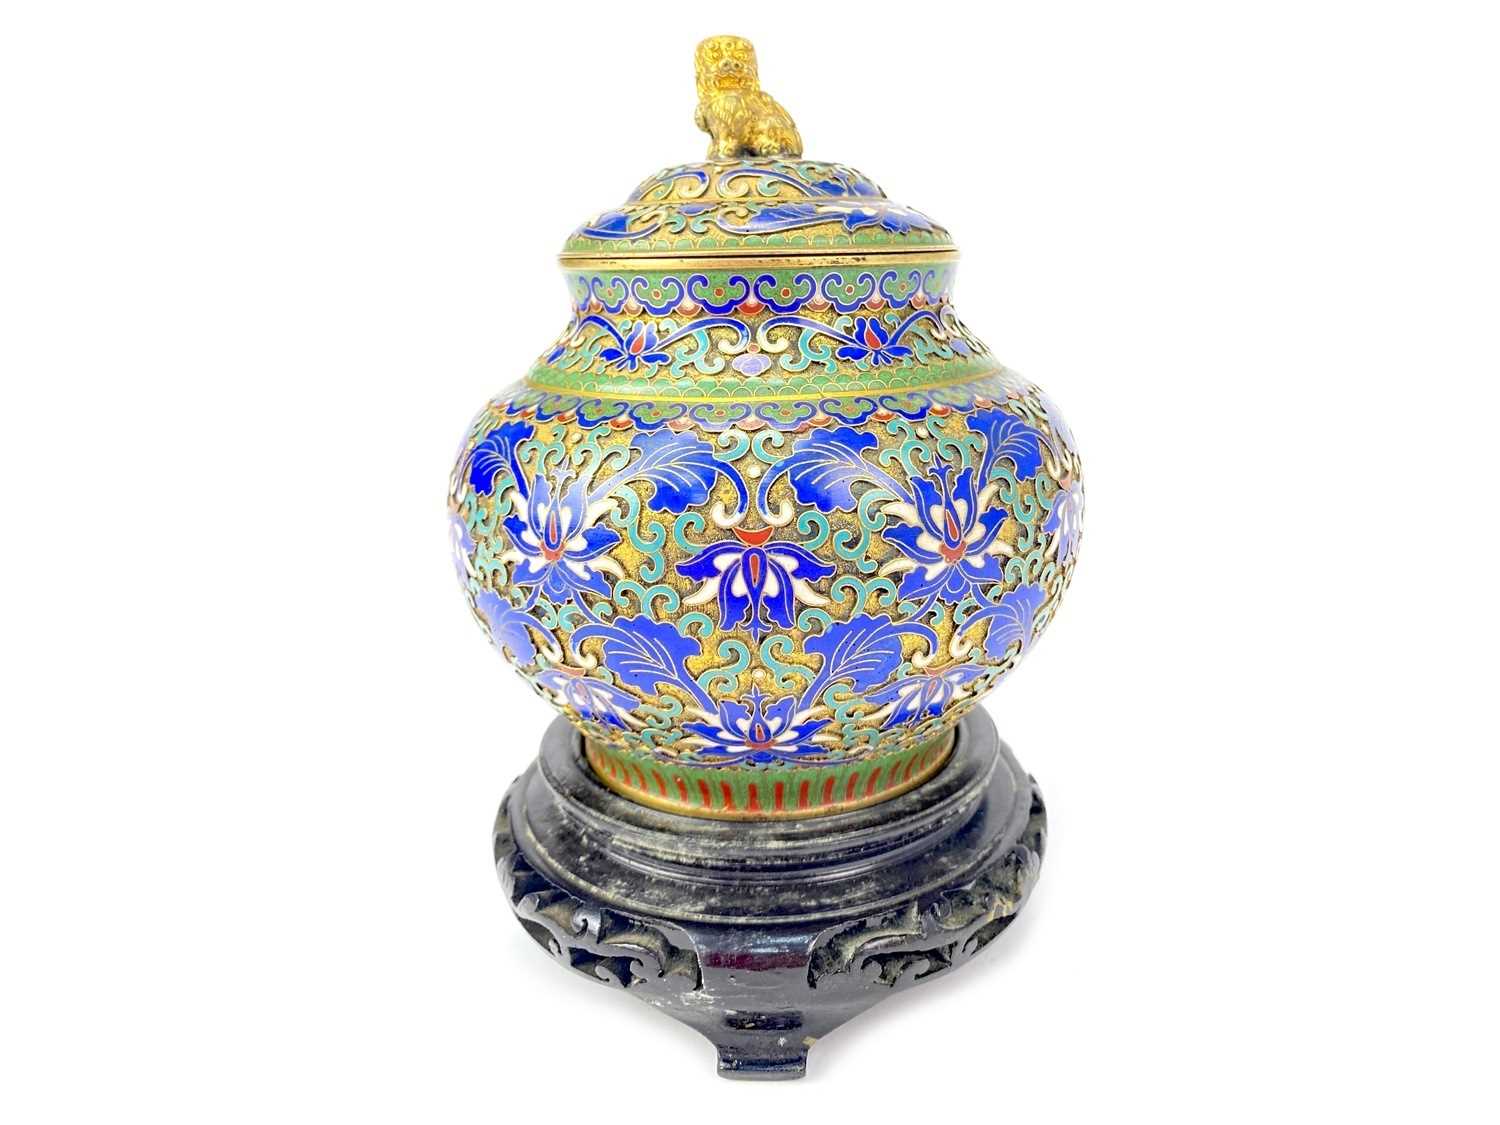 Lot 772 - A 20TH CENTURY CHINESE CLOISONNÉ ENAMEL JAR WITH COVER